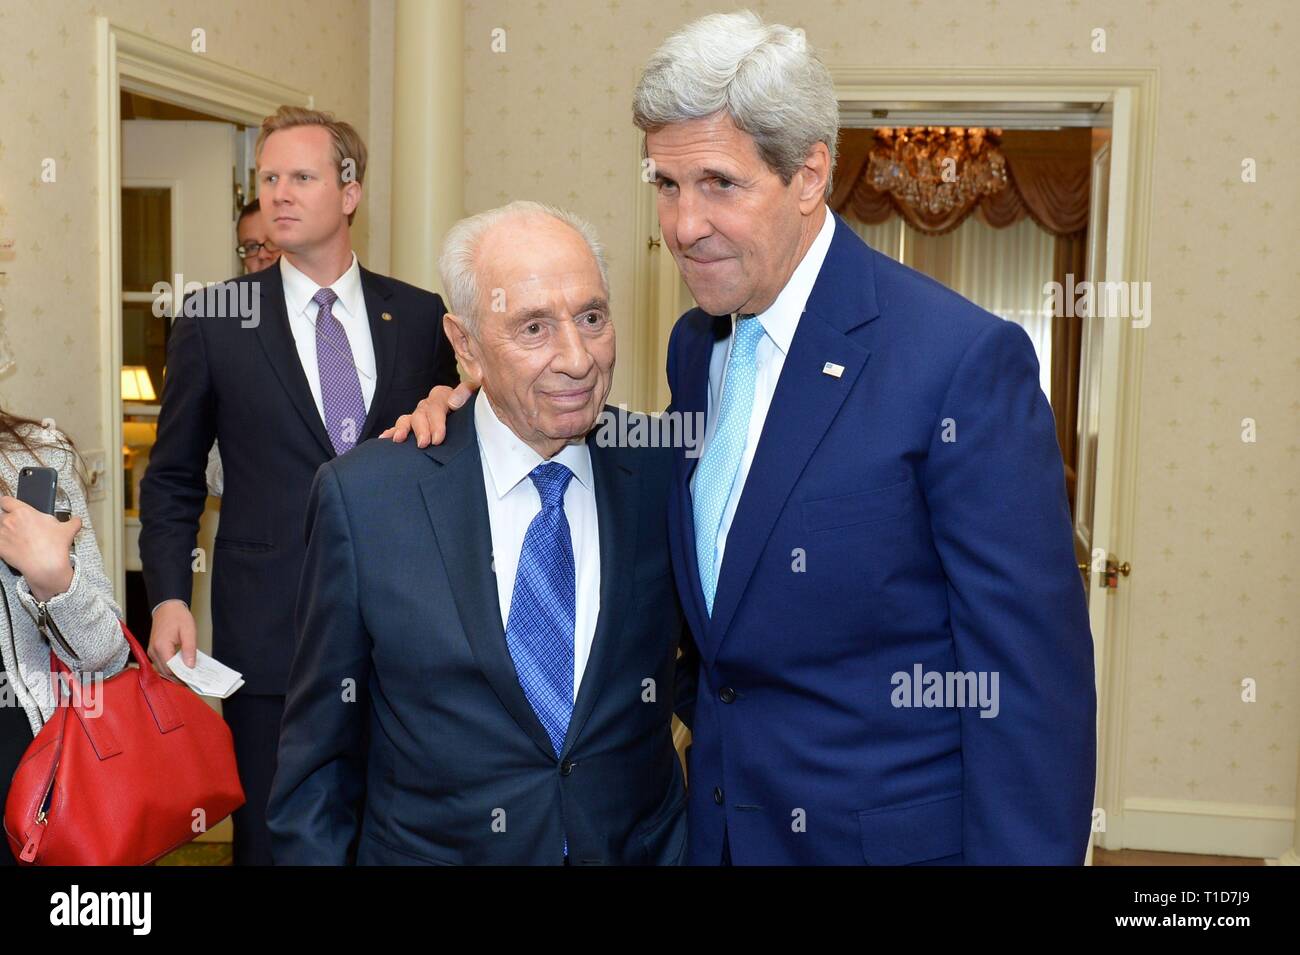 U.S. Secretary of State John Kerry meets with former Israeli President Shimon Peres in New York City on September 22, 2014. The Secretary is holding m Stock Photo